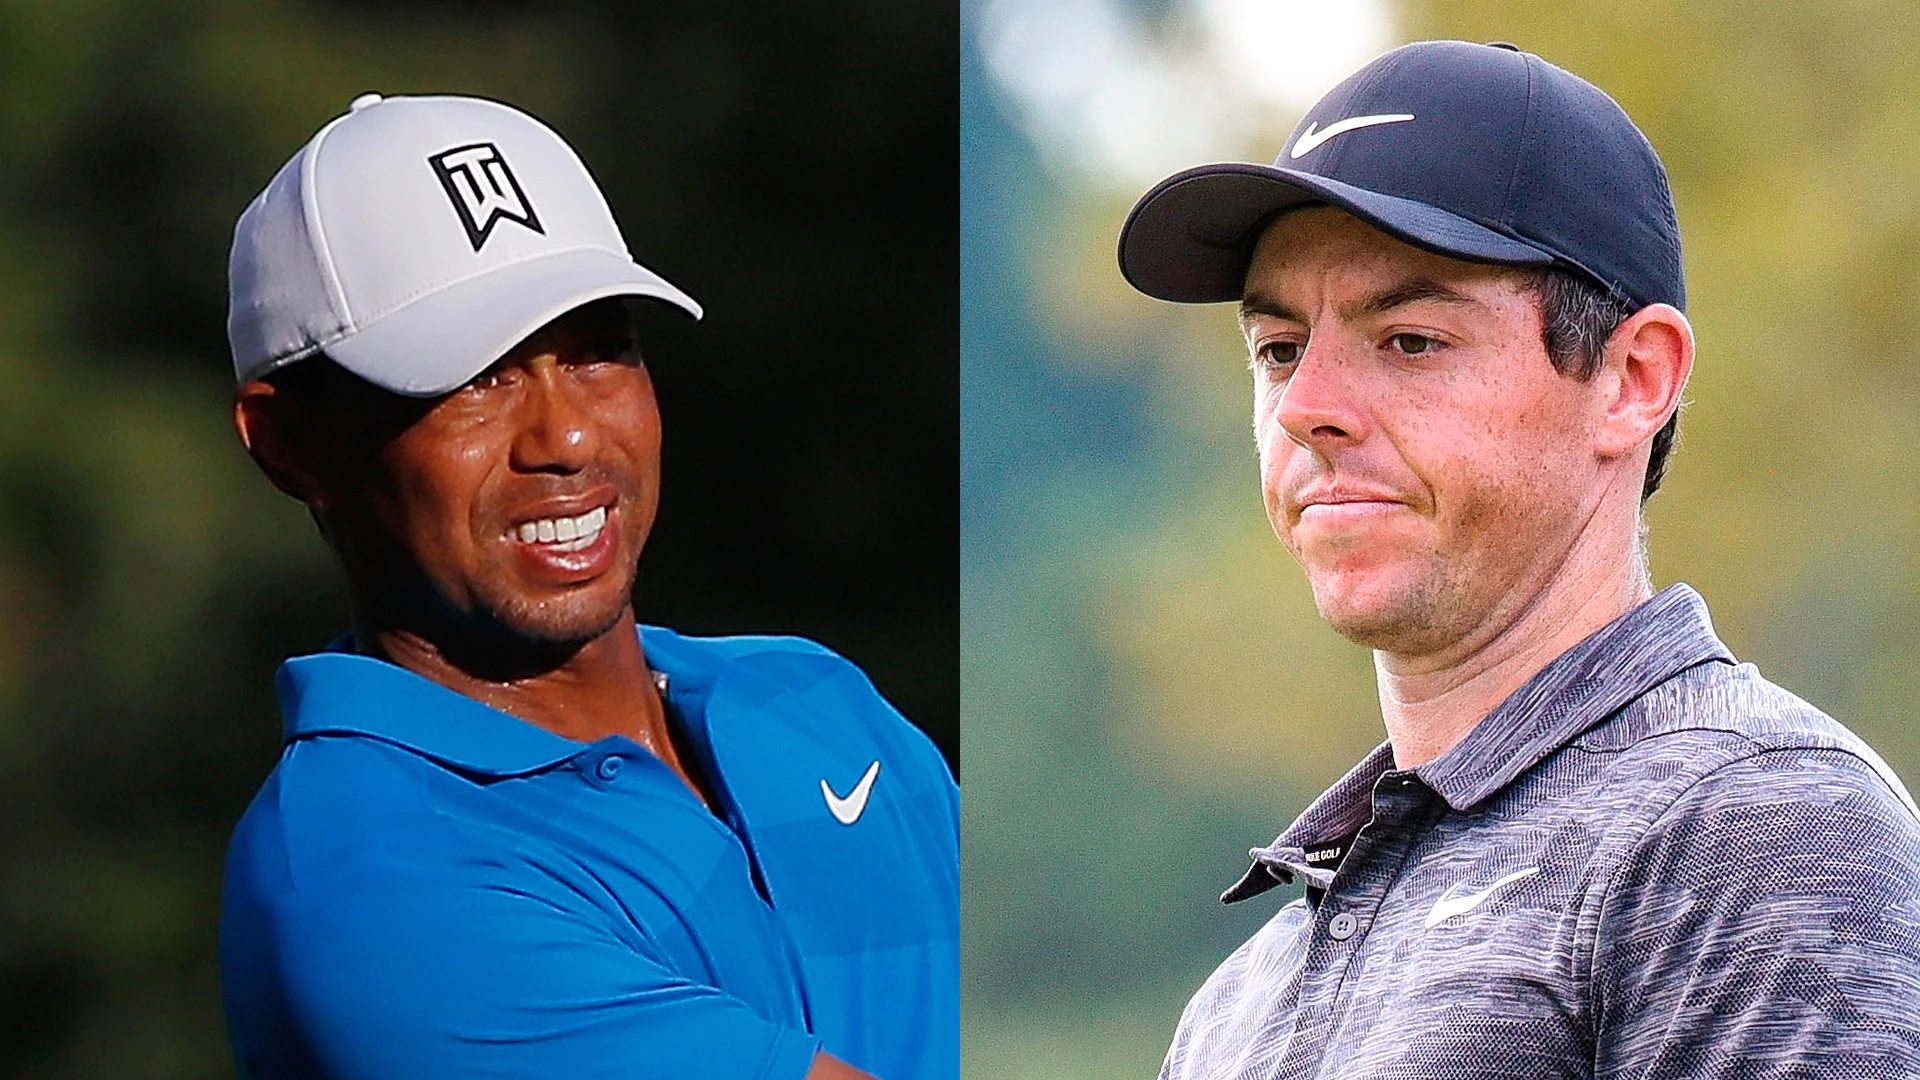 Woods, McIlroy in Sunday super group in finale